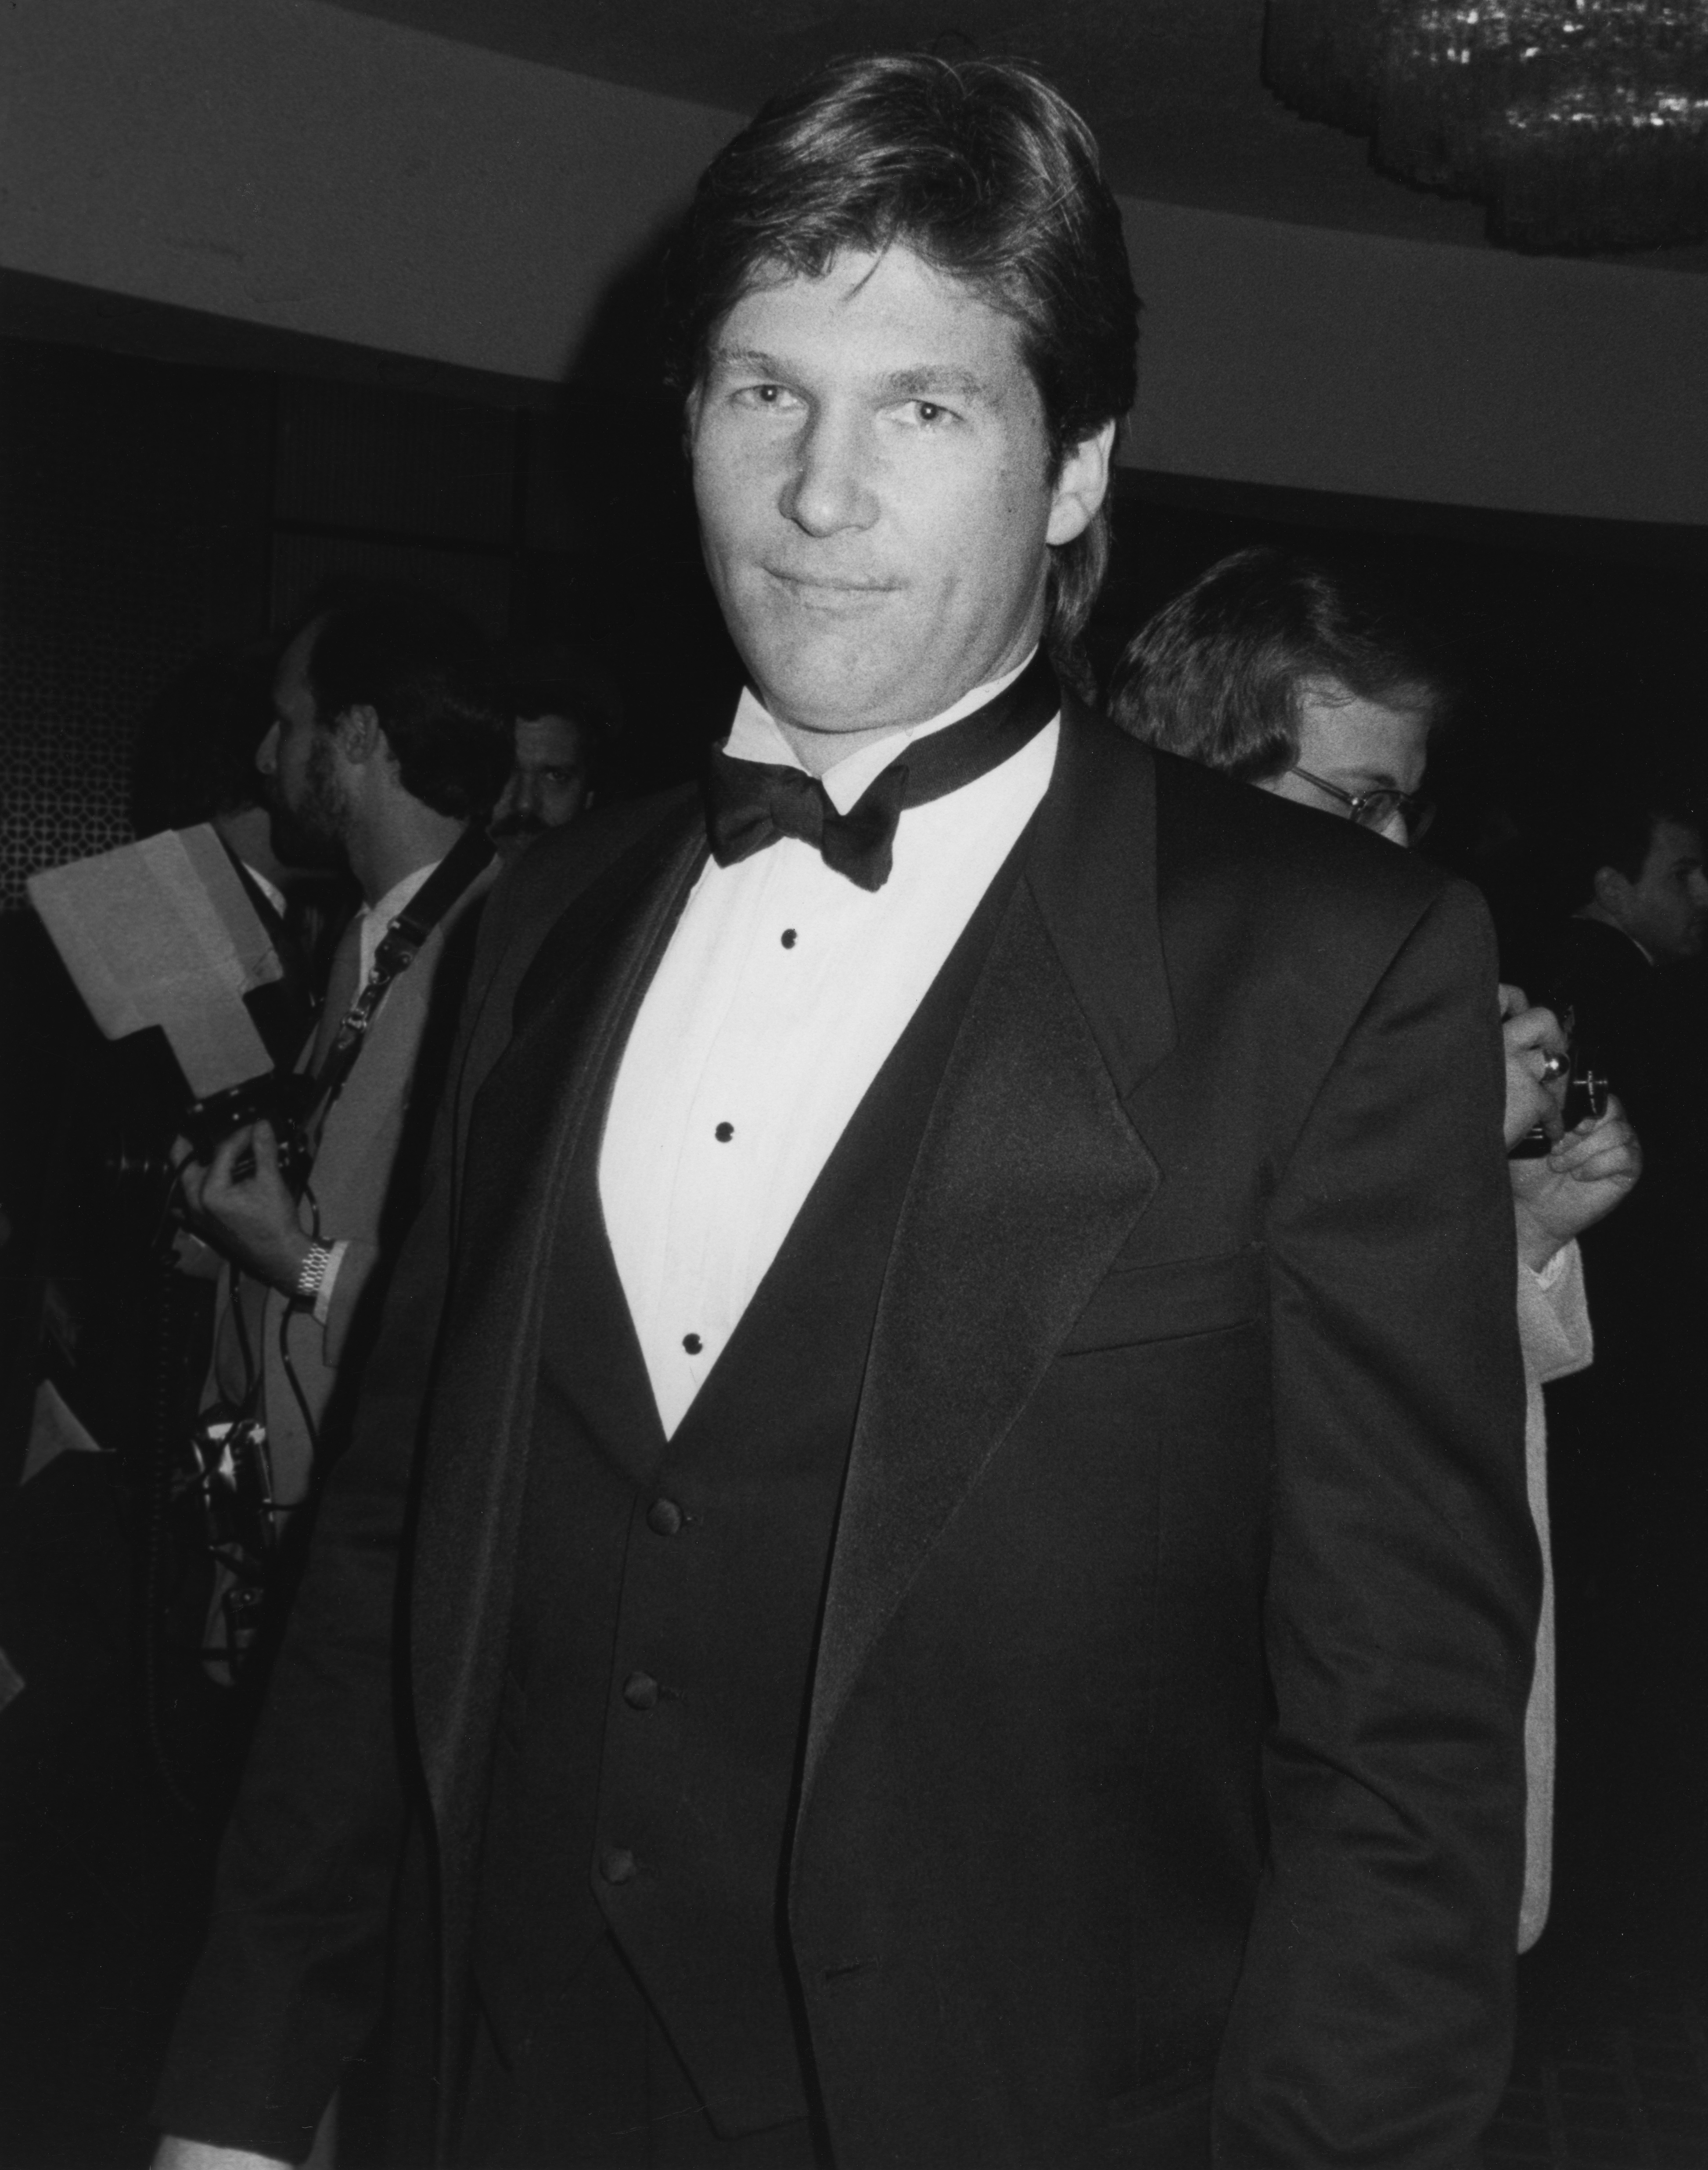 The movie star attends the 29th Annual Thalians Ball, held in Los Angeles, California, on November 3, 1984. | Source: Getty Images